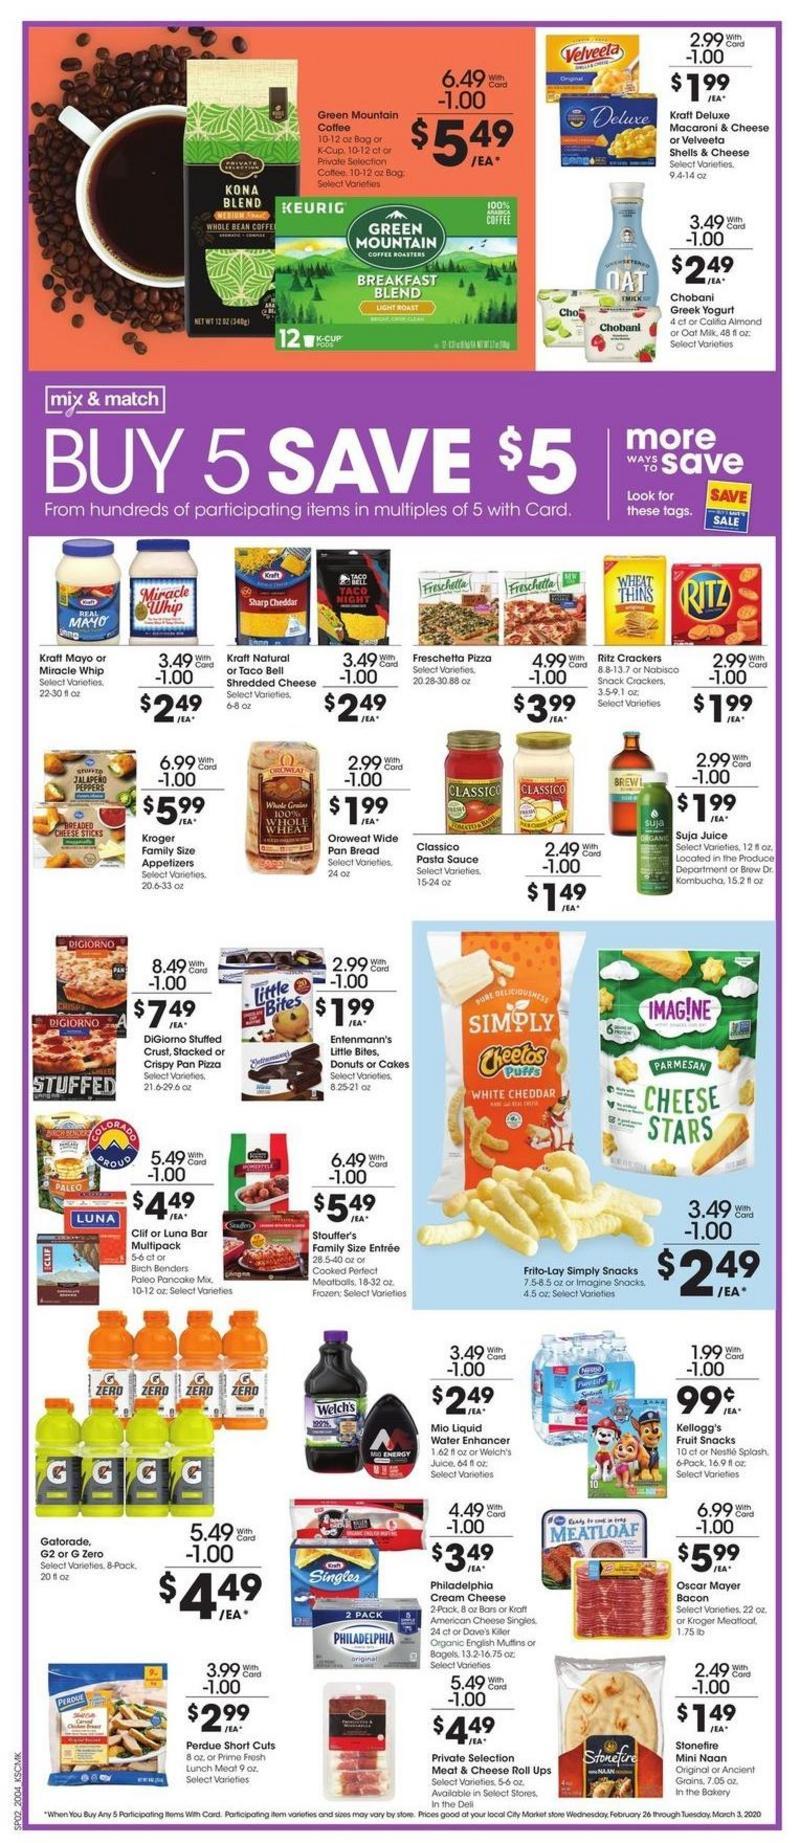 City Market Weekly Ad from February 26